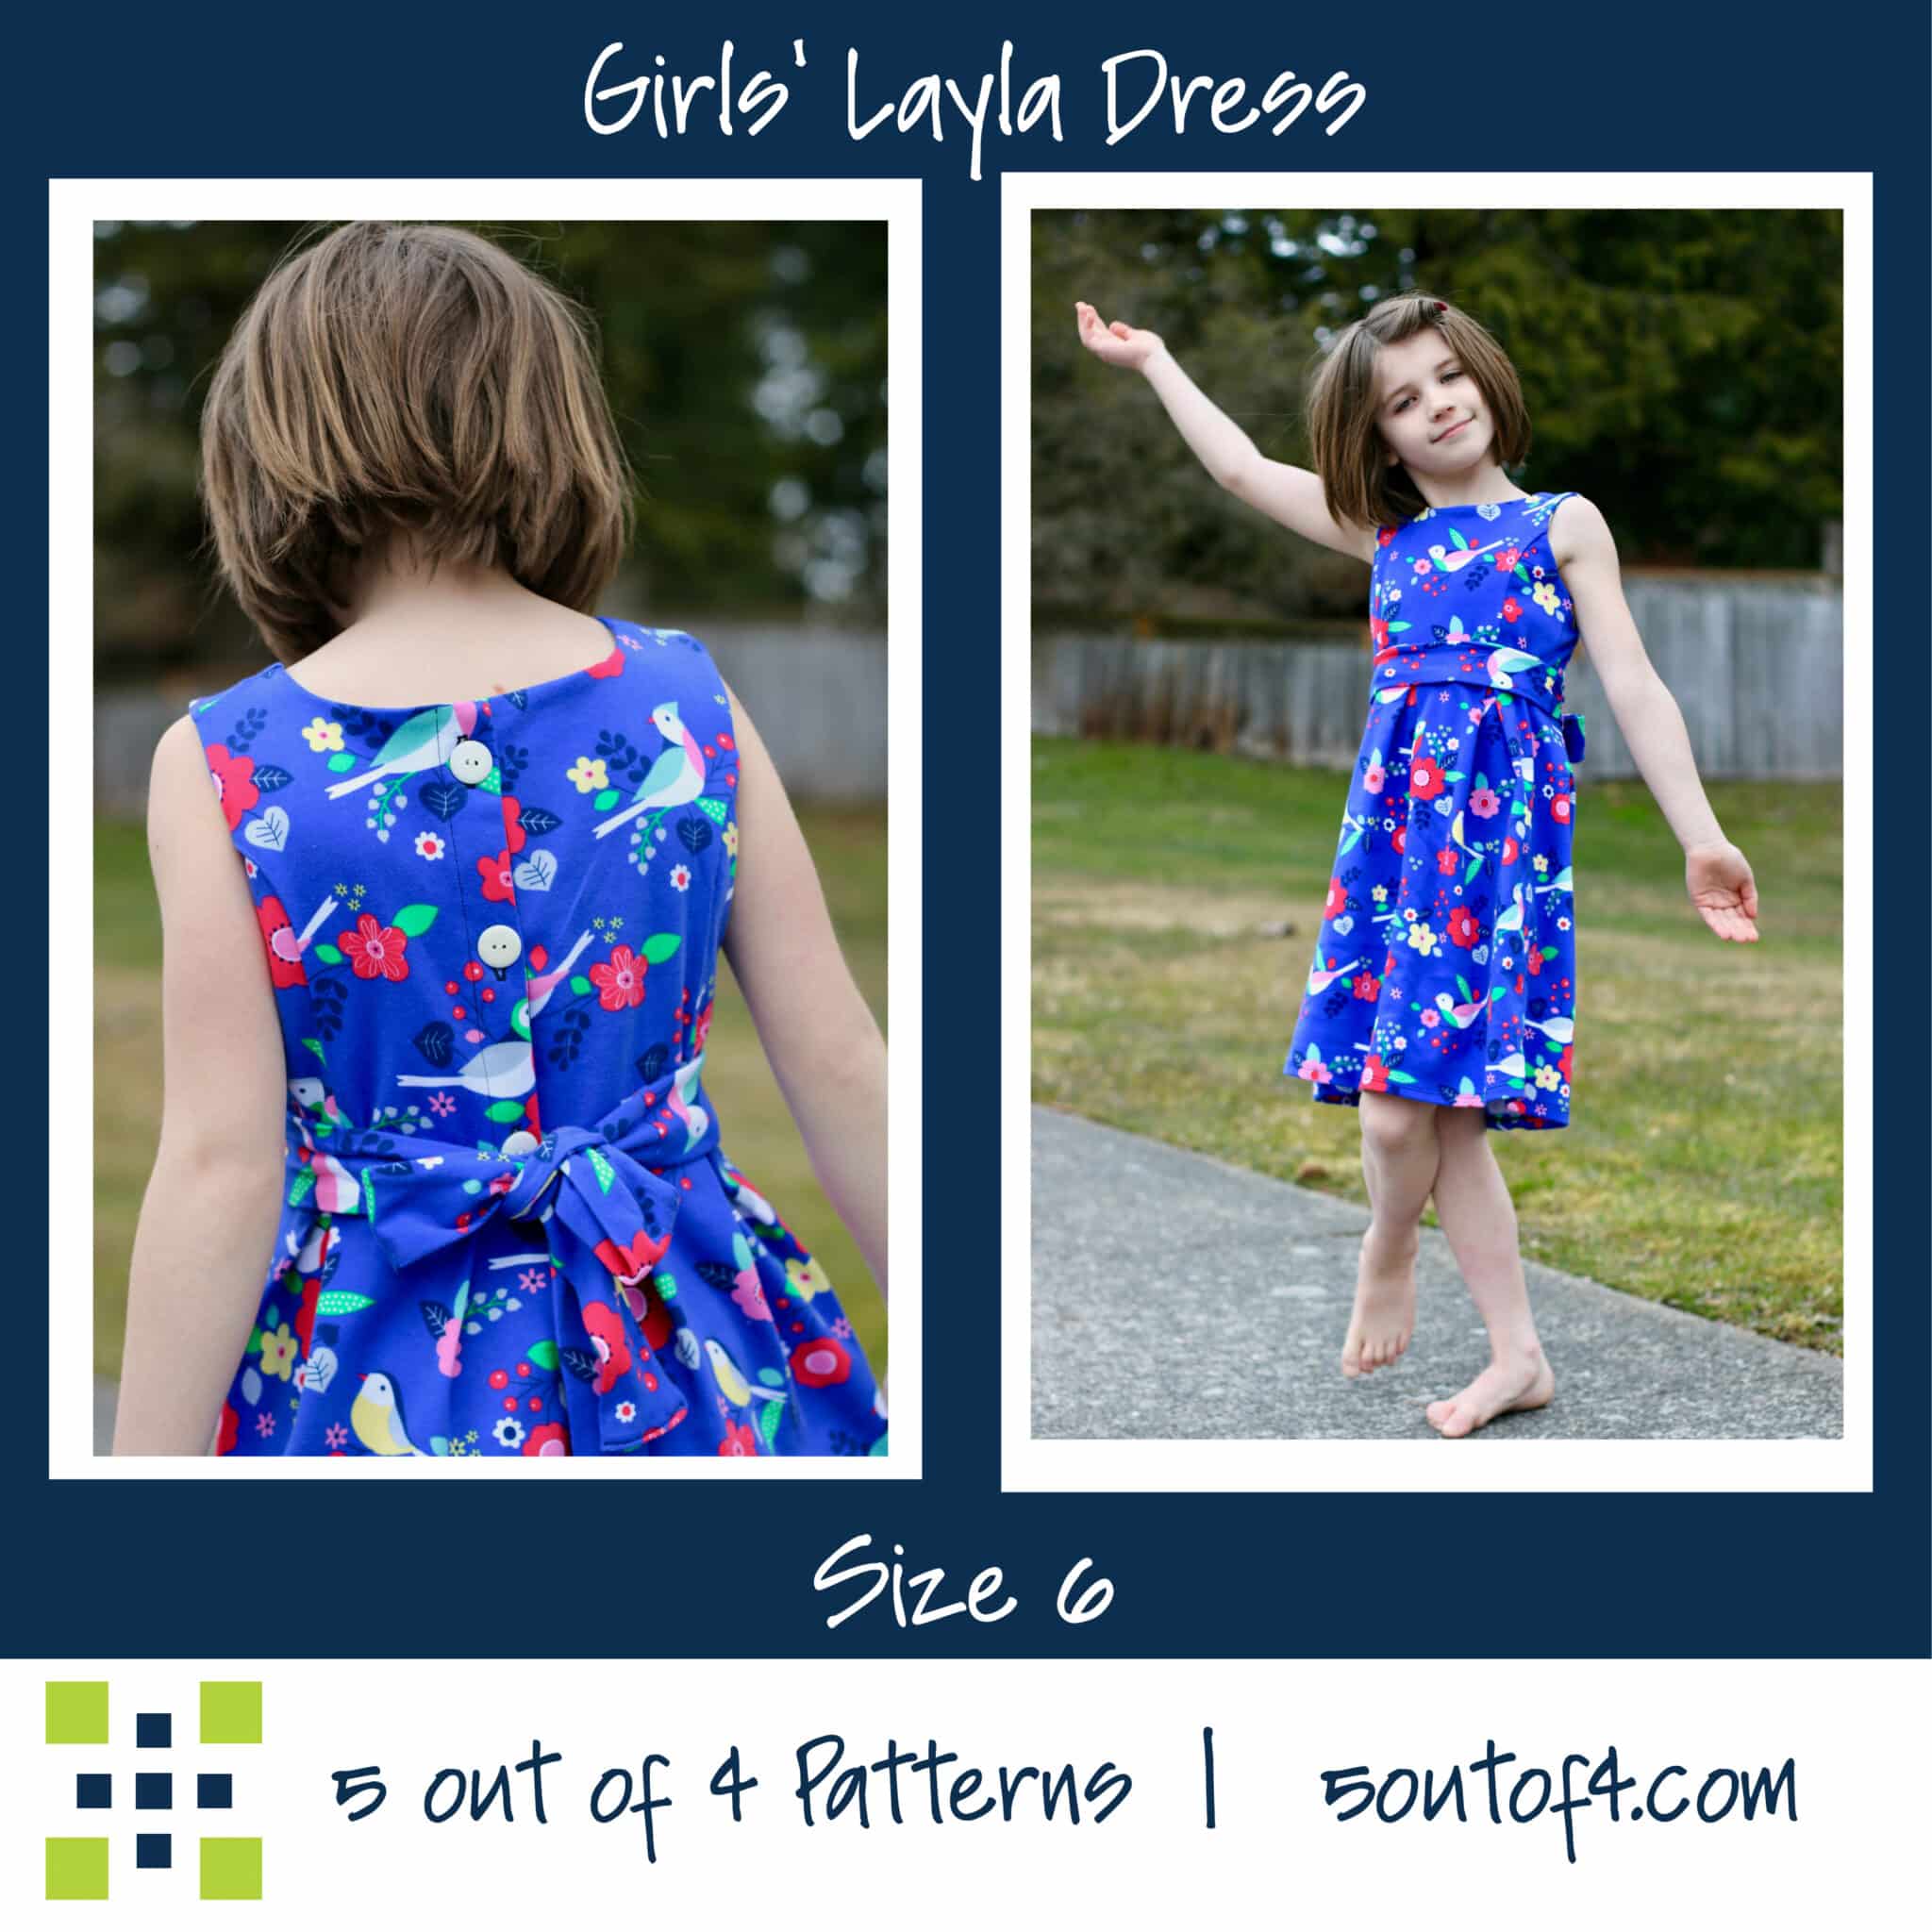 Try These 21 Adorable Crochet Patterns for Girls Dresses